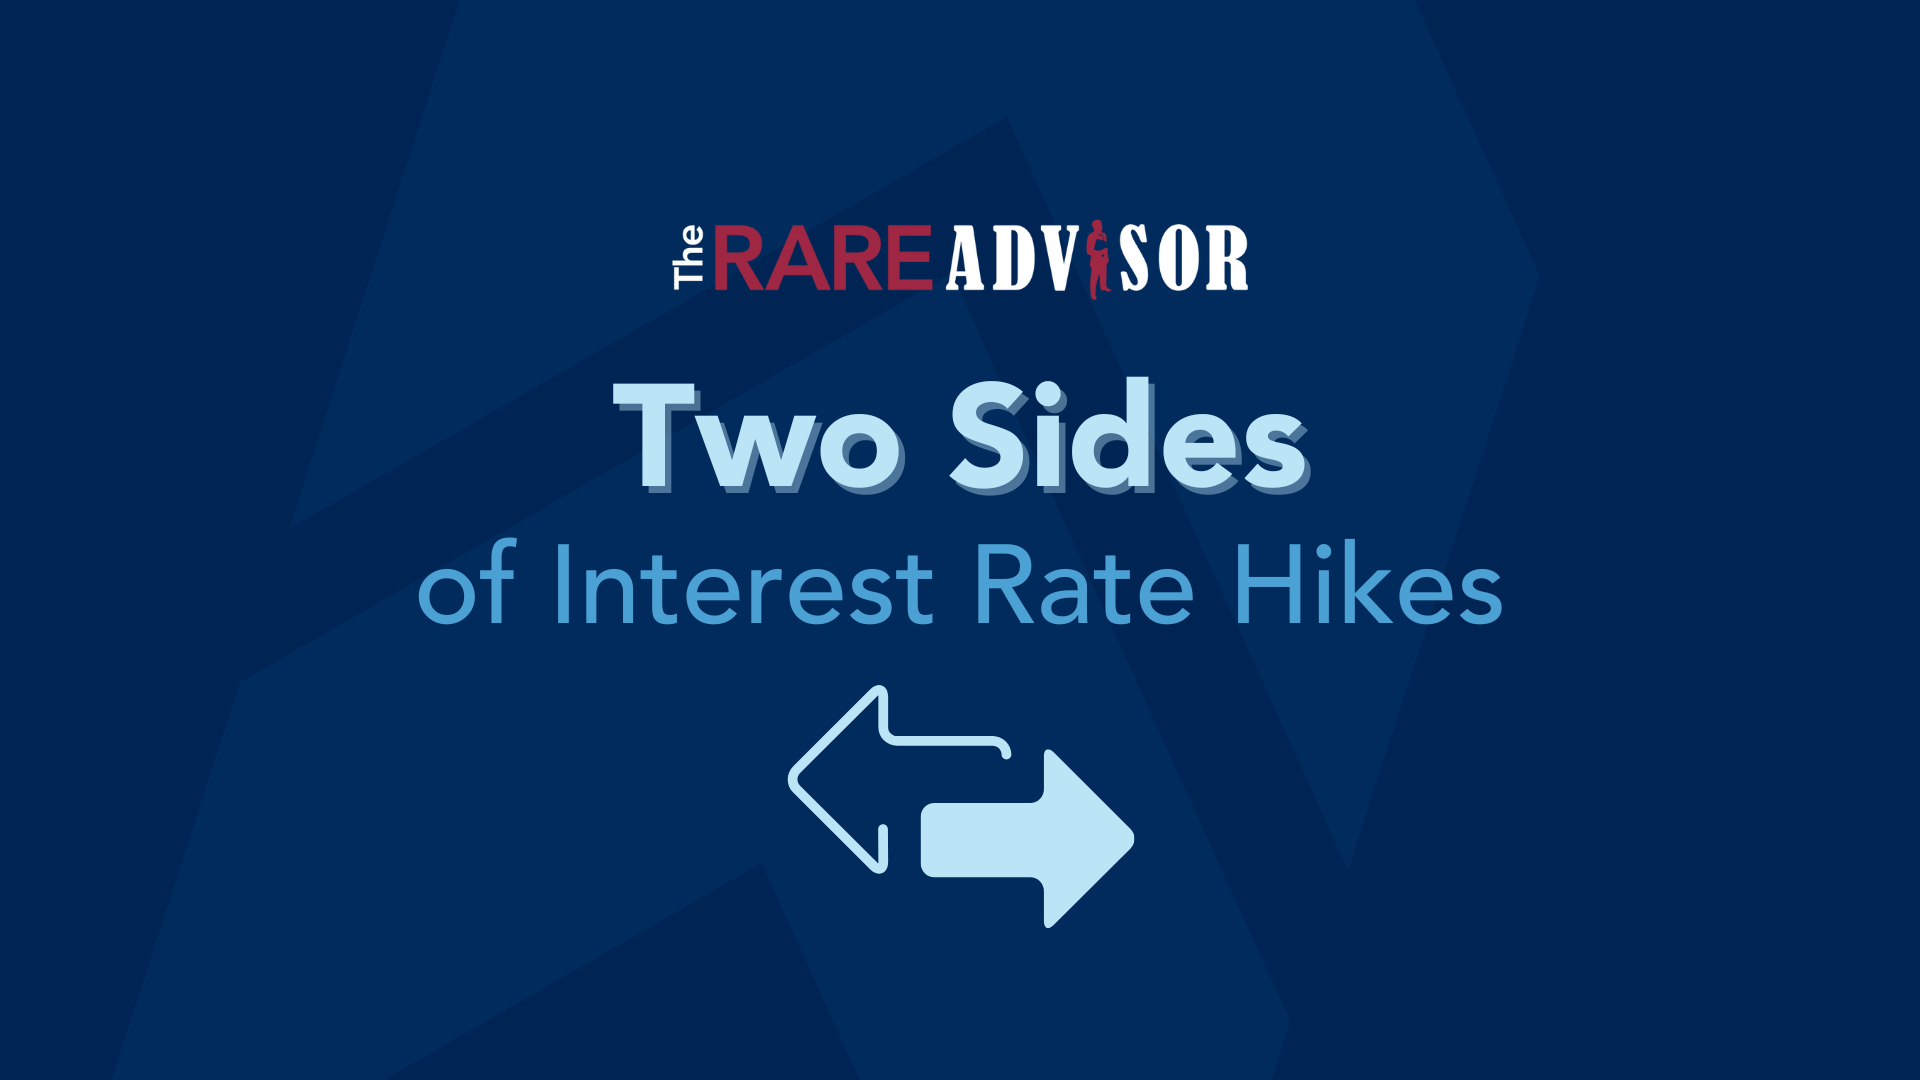 The RARE Advisor: Two Sides of Interest Rate Hikes